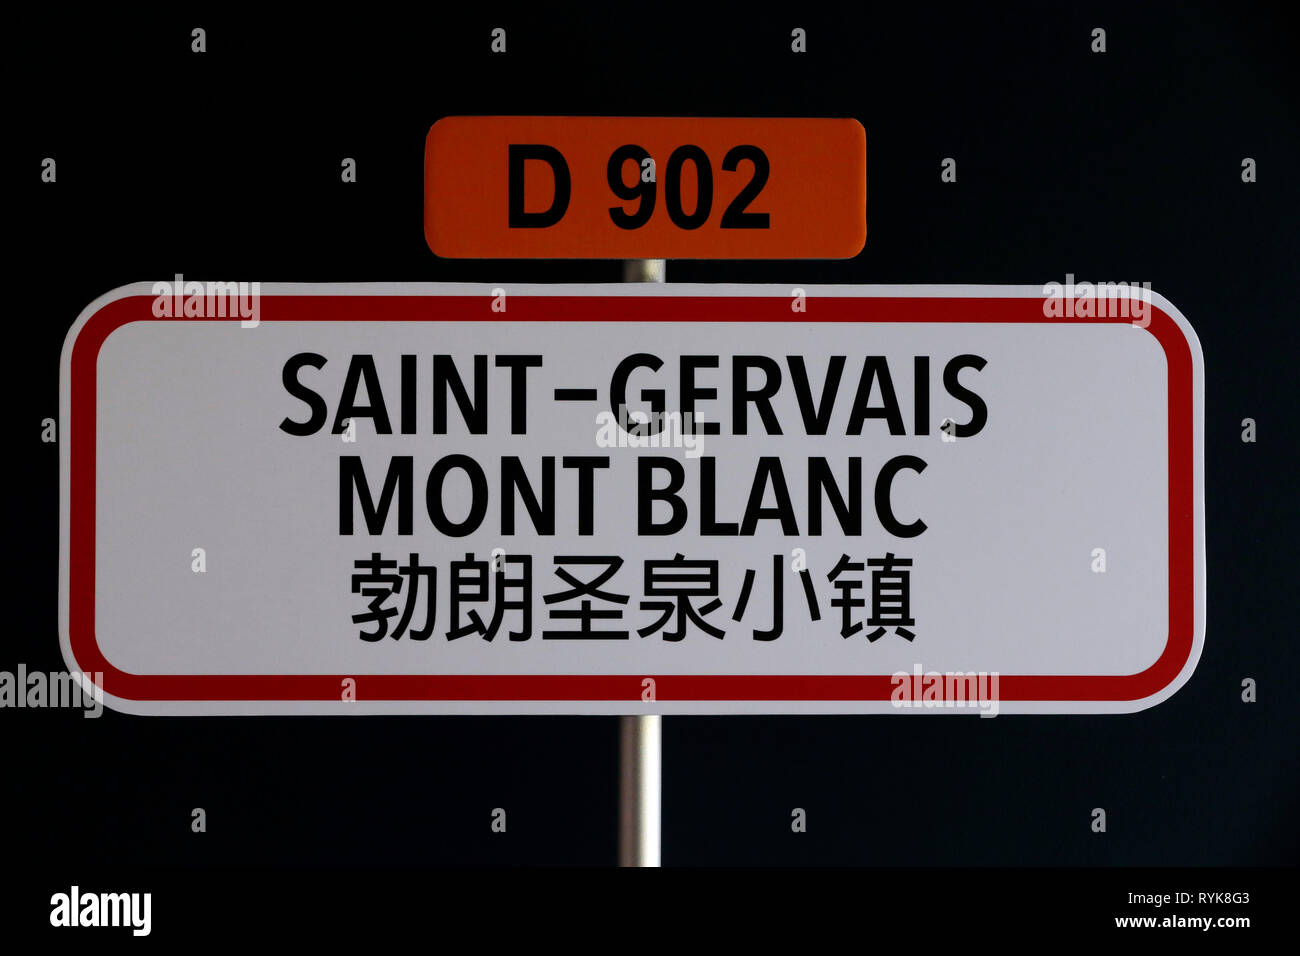 Saint-Gervais Mont-Blanc thermal spa.  France. Stock Photo